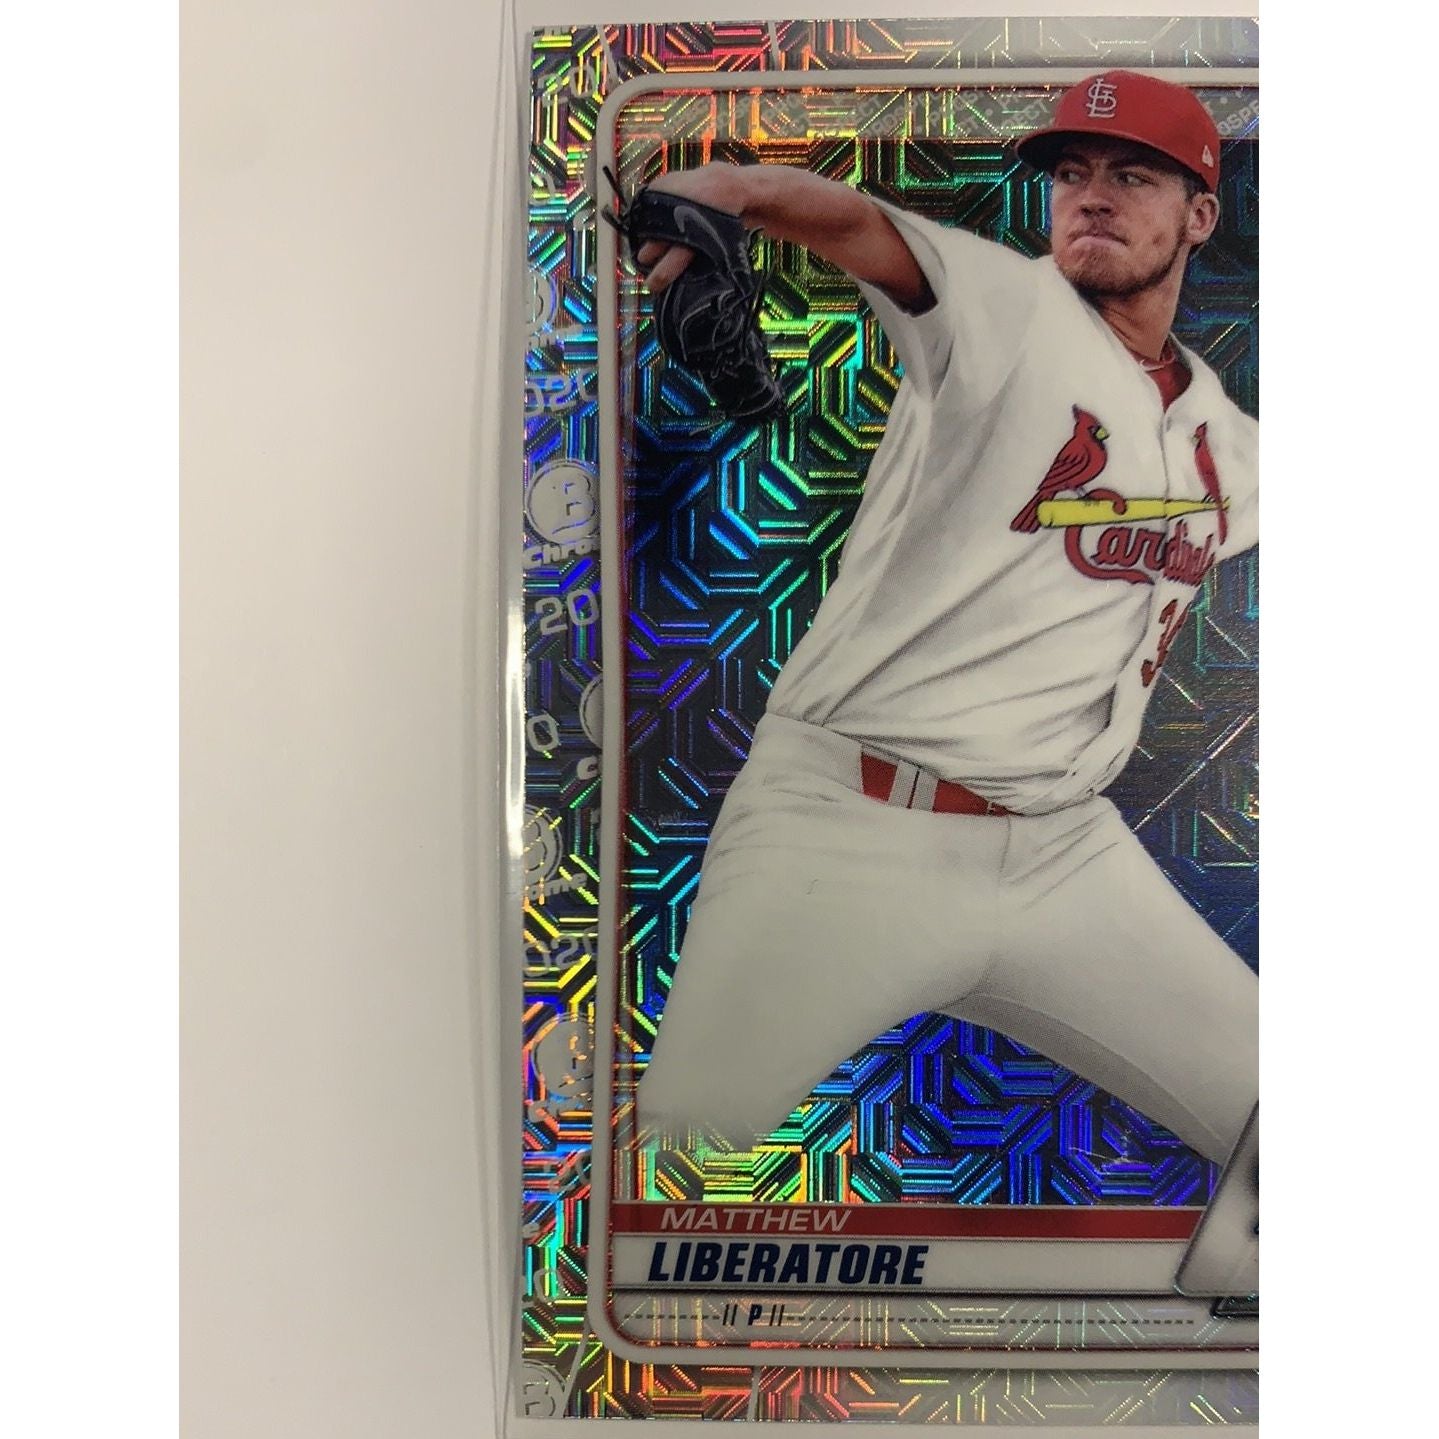  2020 Bowman Chrome Matthew Liberatore Mojo Refractor  Local Legends Cards & Collectibles